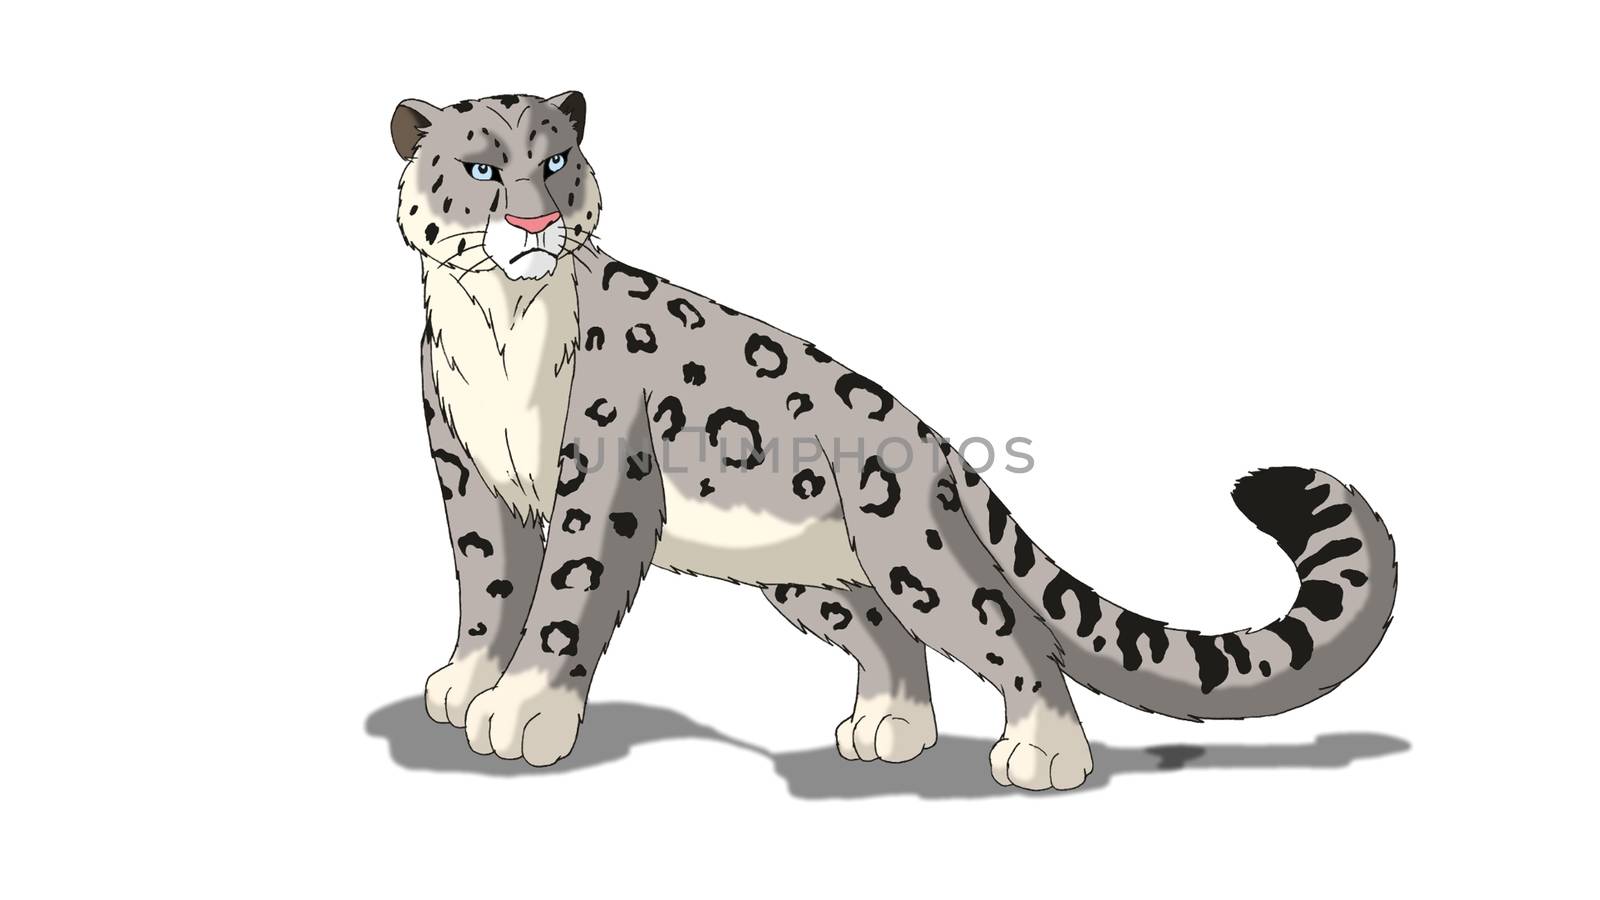 Digital painting of the Snow Leopard